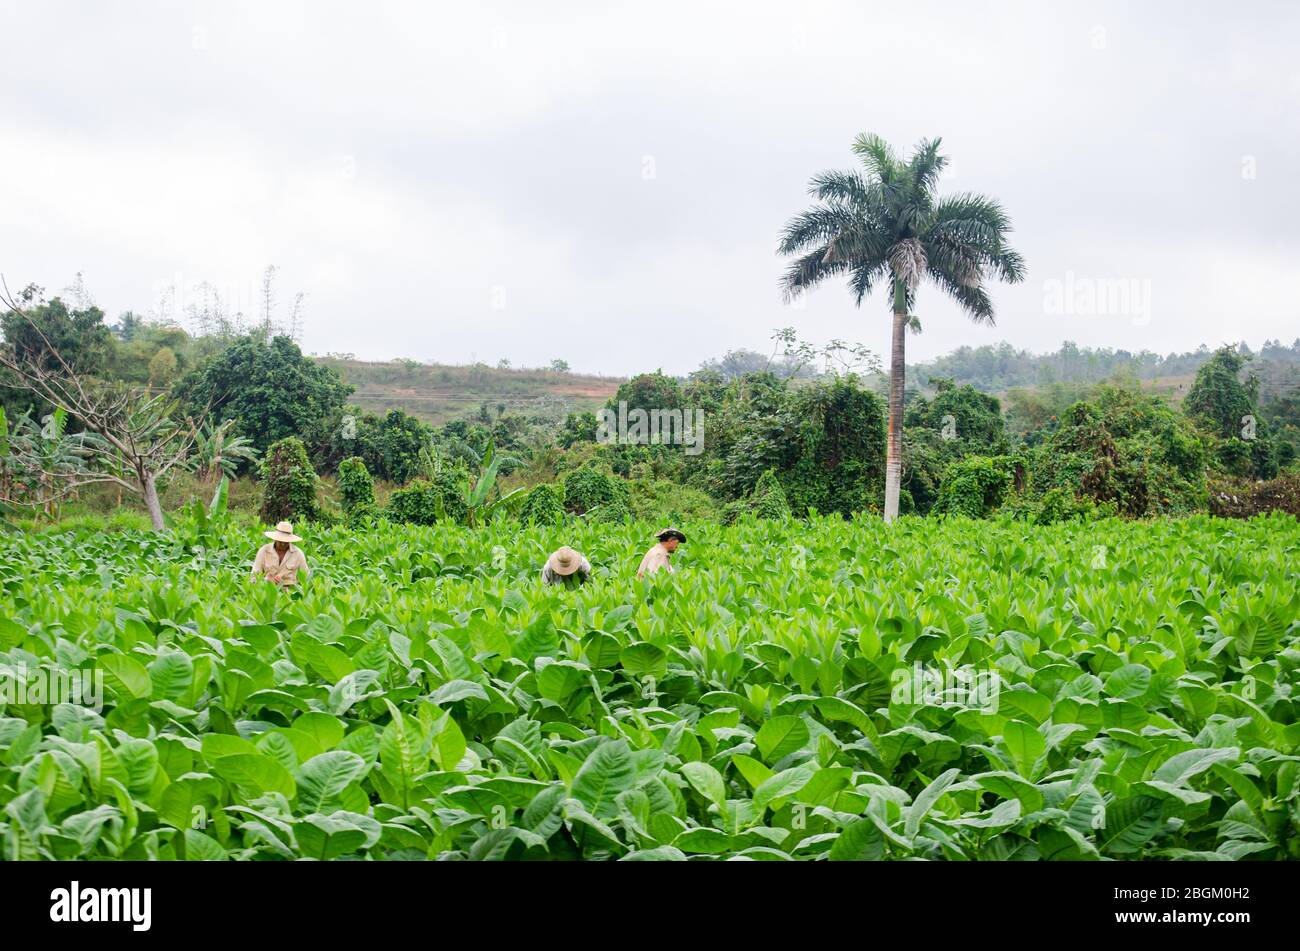 Three men working in a tobacco field in Vinales Stock Photo